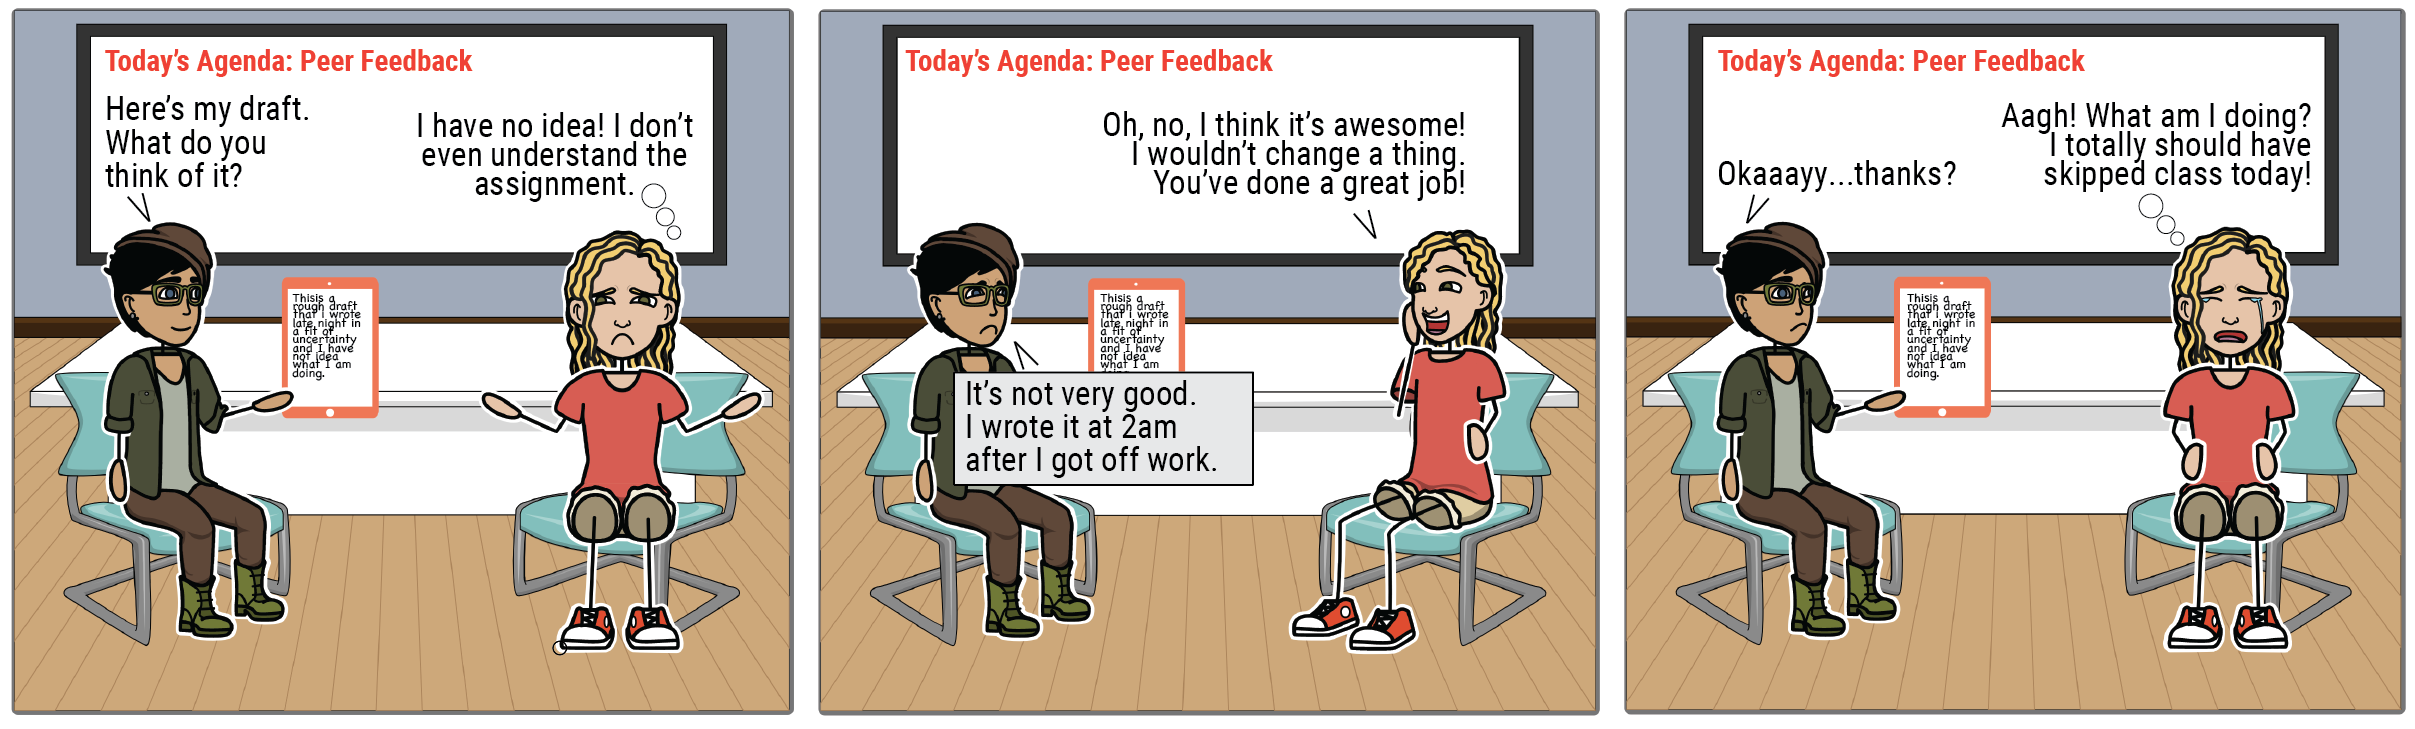 A comic strip shows two students engaging in peer feedback. The first student asks, "What do you think of my draft?" The second student responds, "I have no idea. I don't even understand the assignment." Student 1 says, "It's not very good. I wrote it at 2am after I got off work." Student 2: "Oh, no, I think it's awesome. I wouldn't change a thing. You've done a great job!" Student 1: "Okaaaaay, thanks?" Student 2: "Aagh! What am I doing? I totally should have skipped class today."